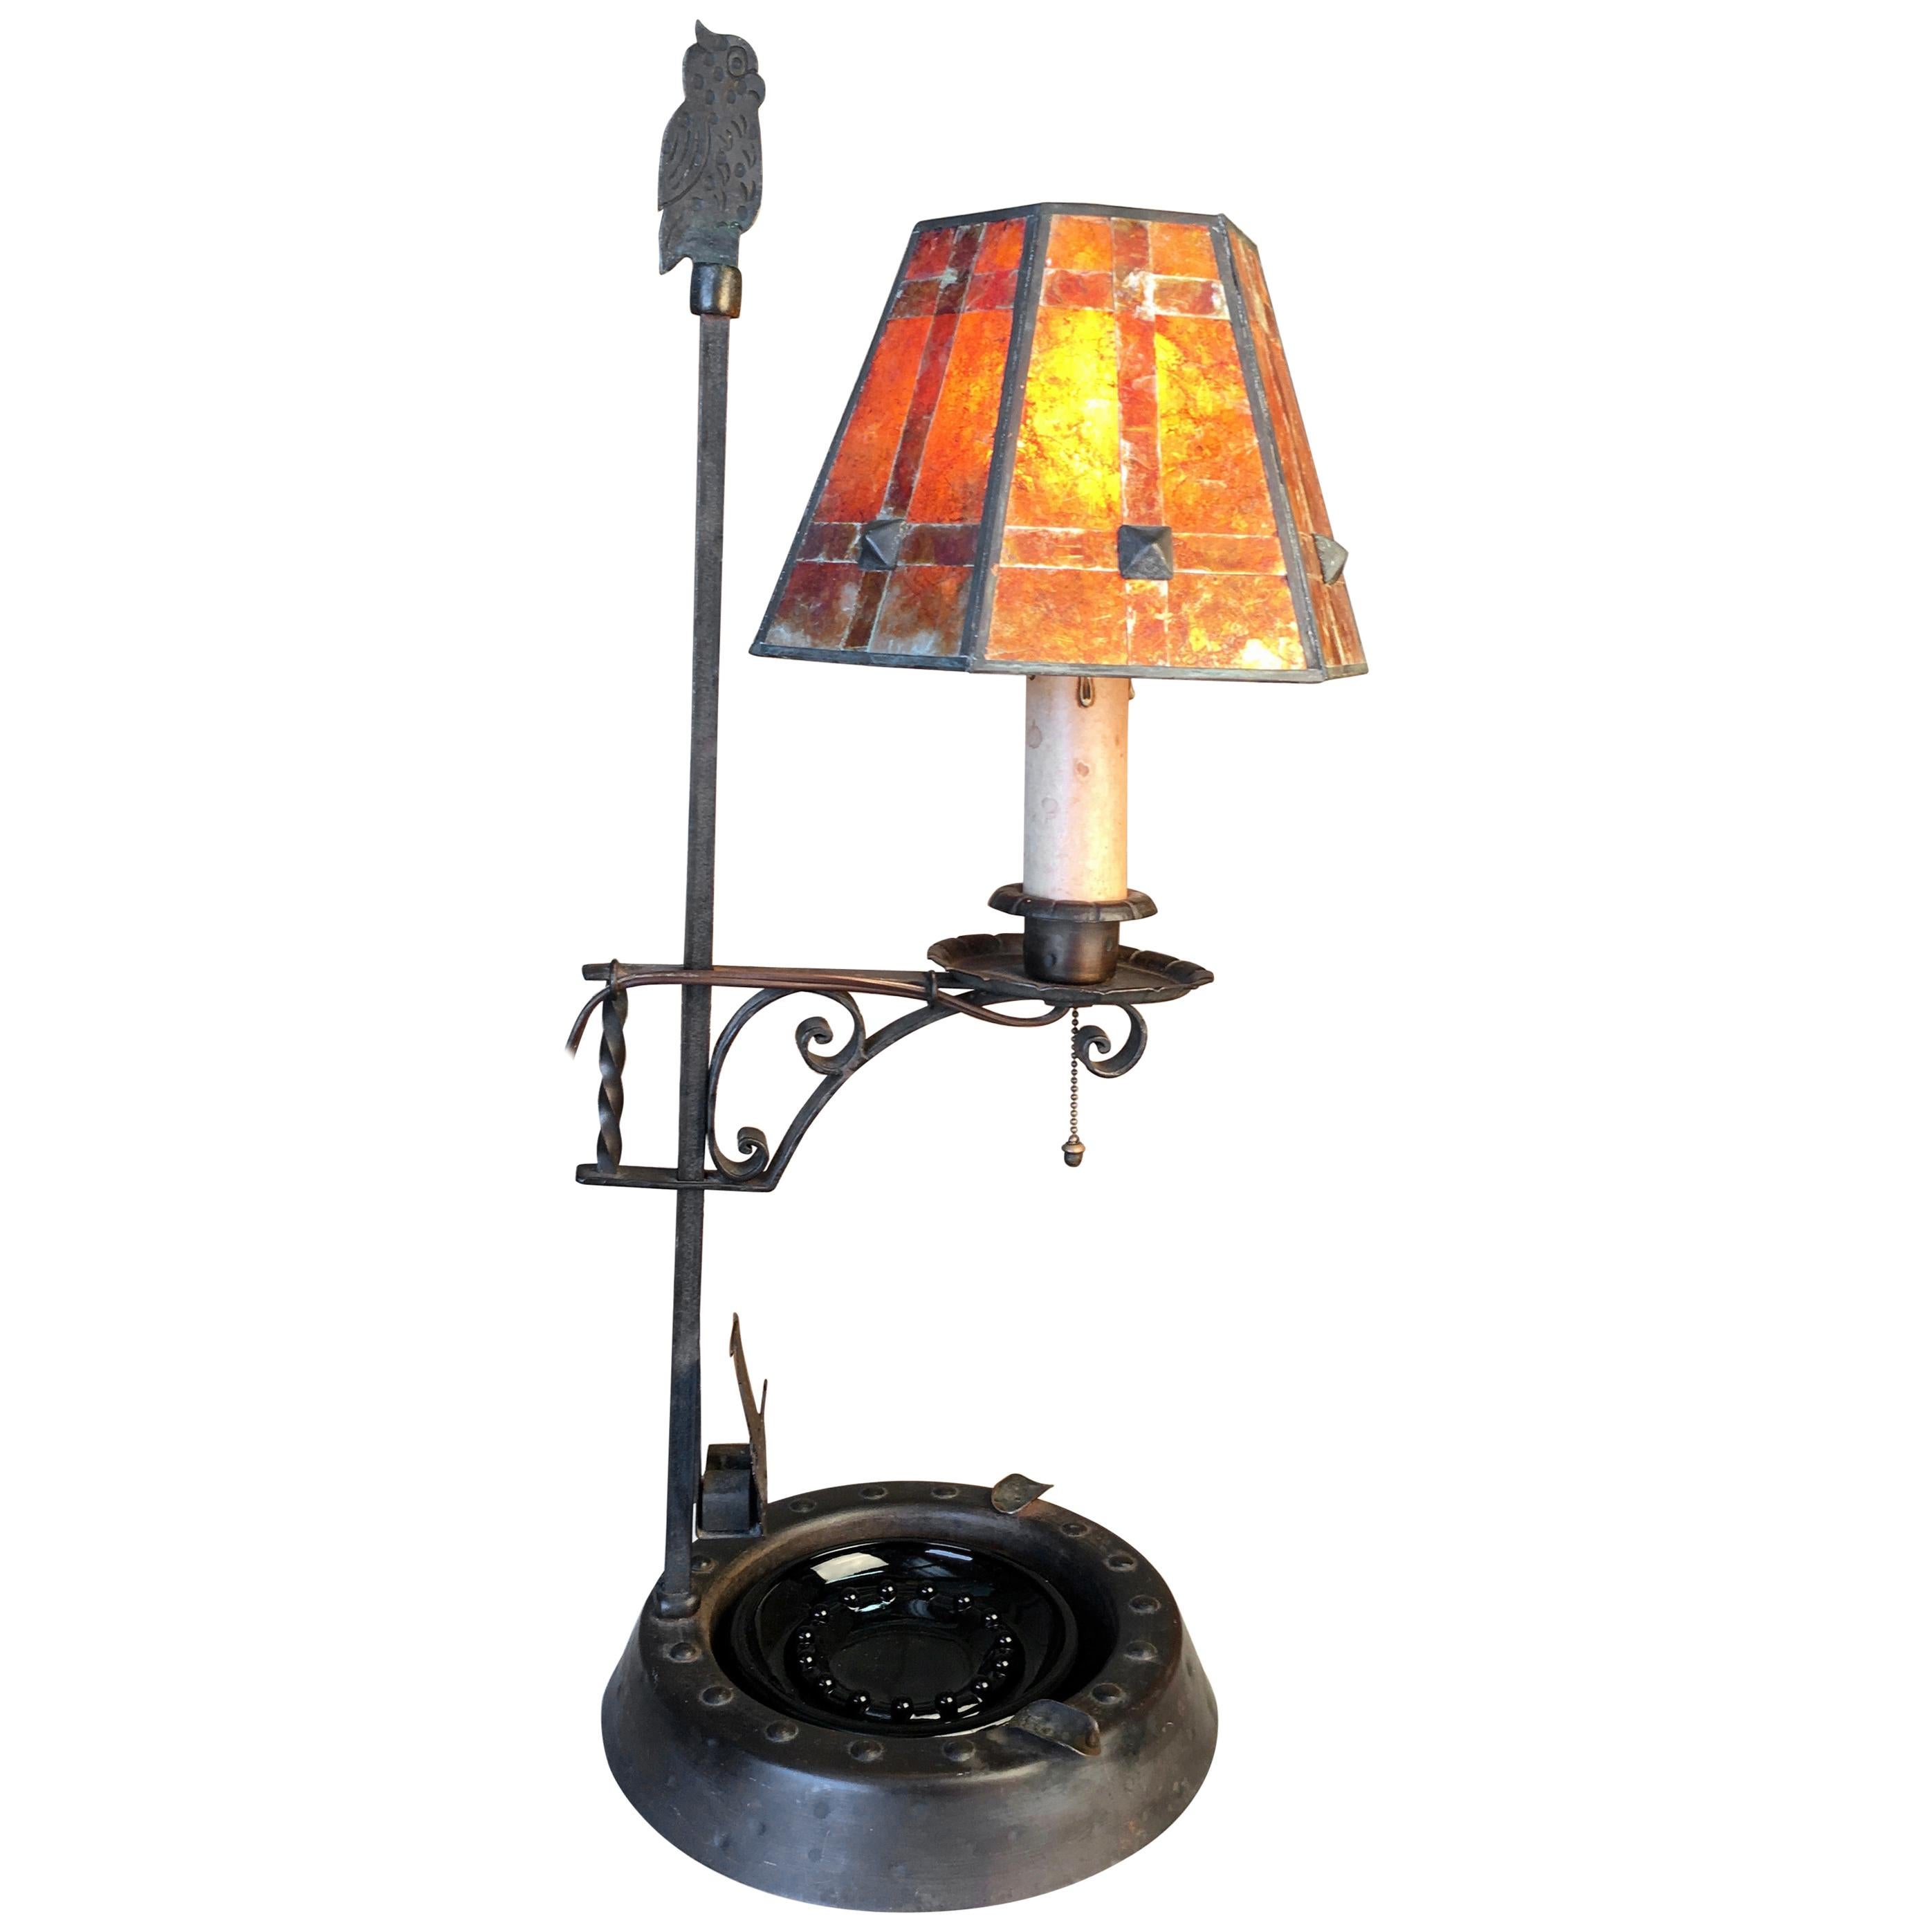 Hand-Hammered Lamp with Mica Shade